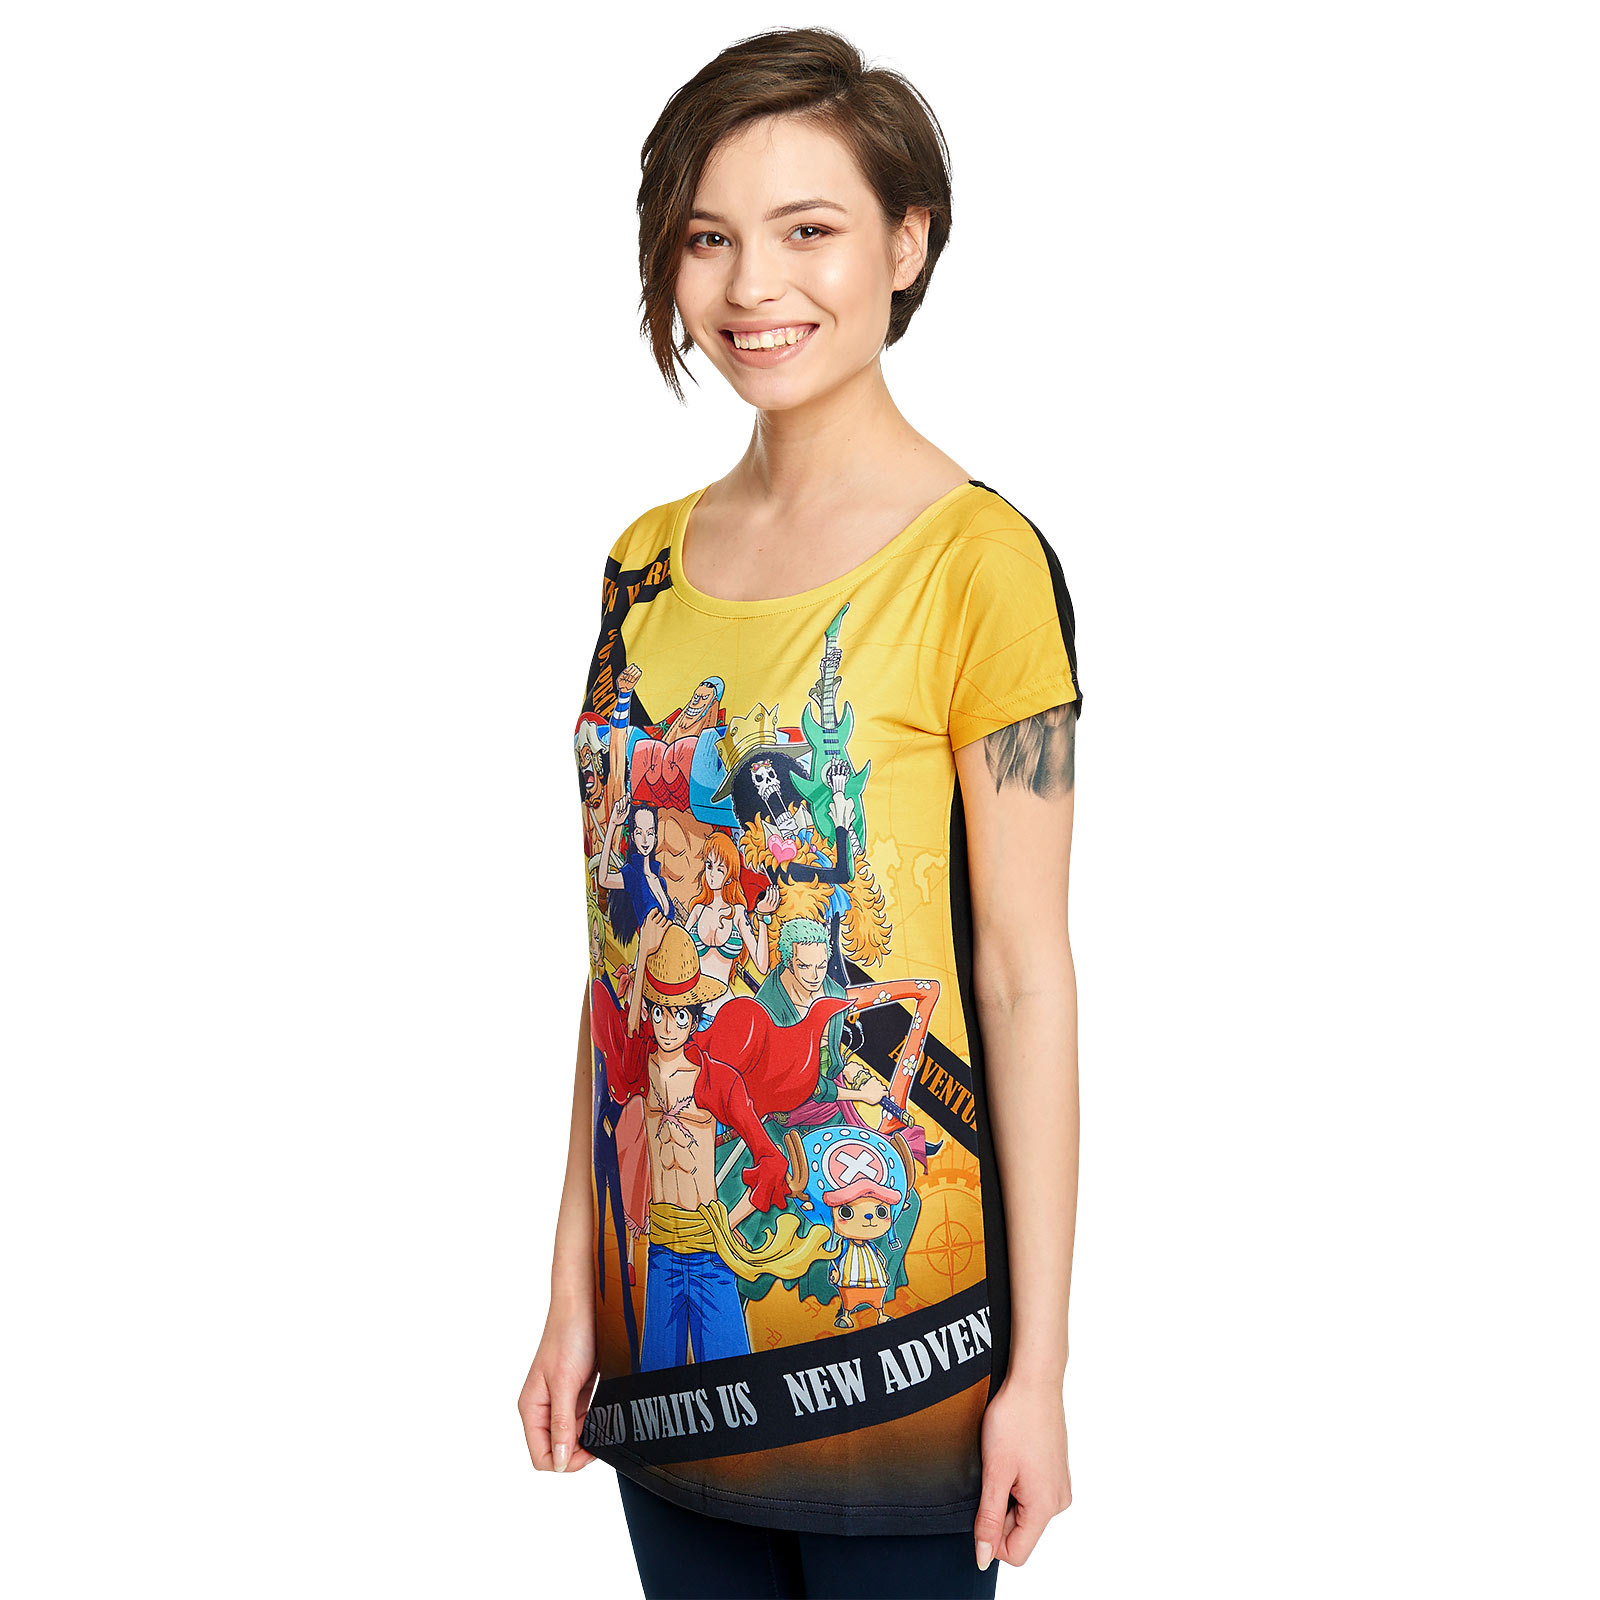 One Piece - Crew New World Women's Loose Fit T-Shirt